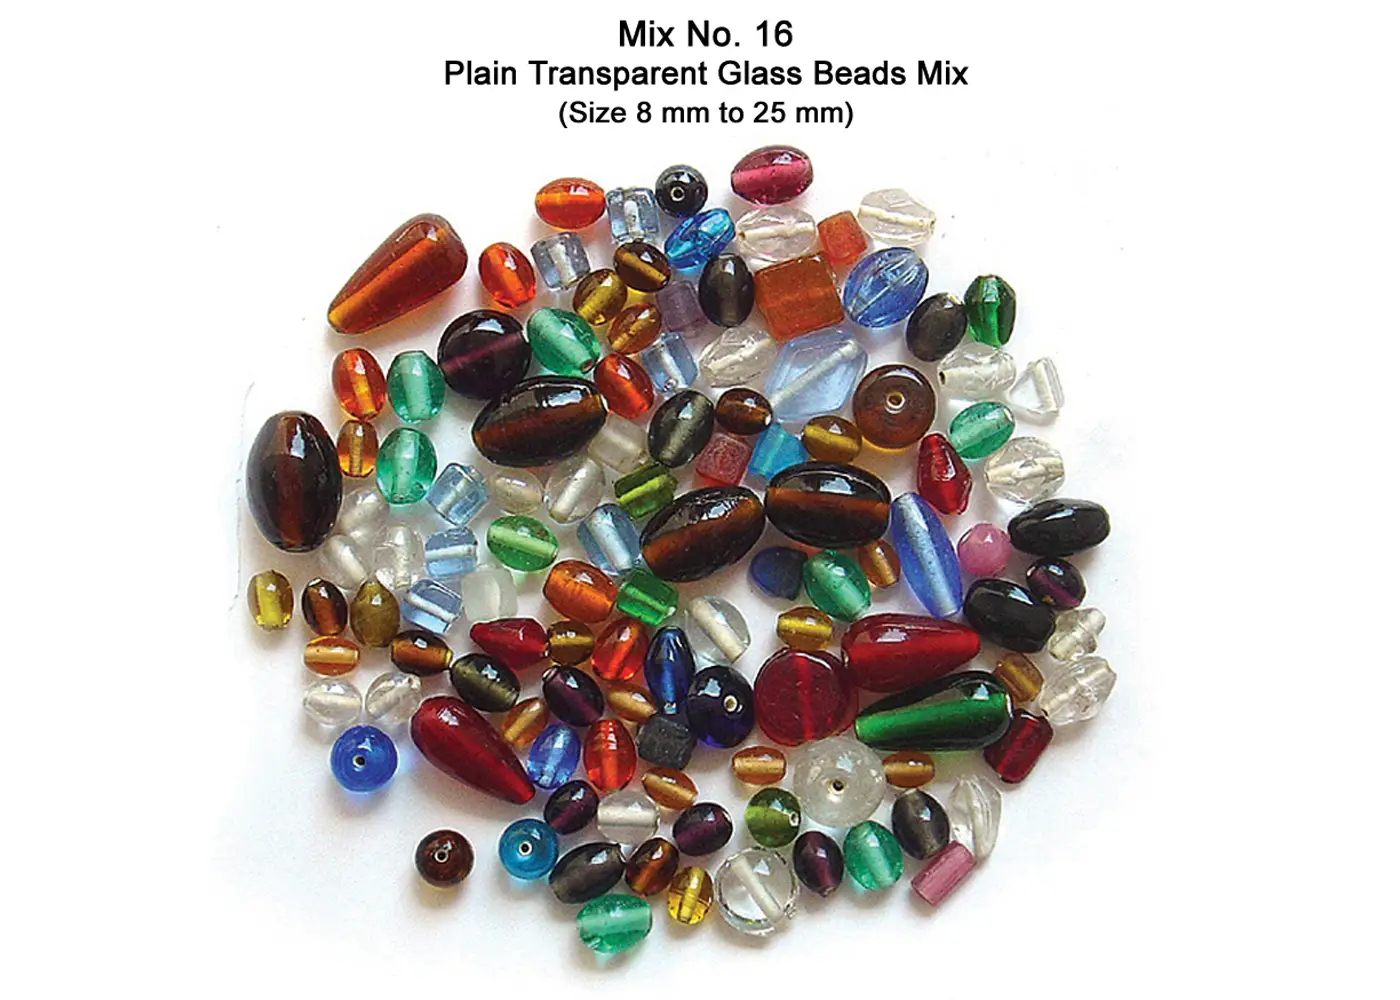 Plain Transparent Glass Beads Mix (Size 8 mm to 25 mm)